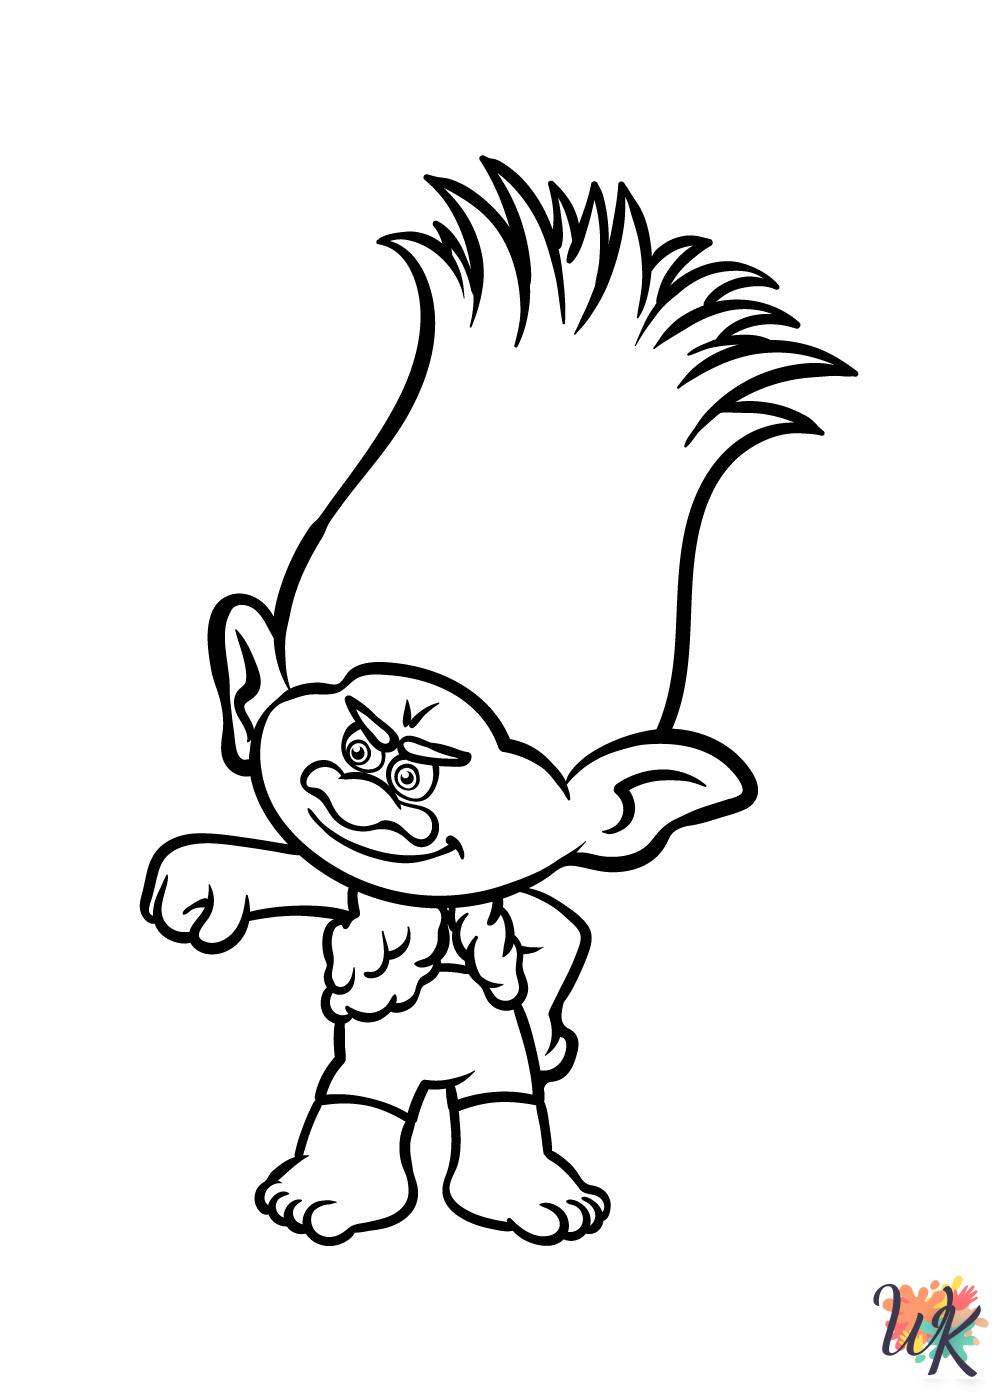 Trolls coloring pages for adults pdf